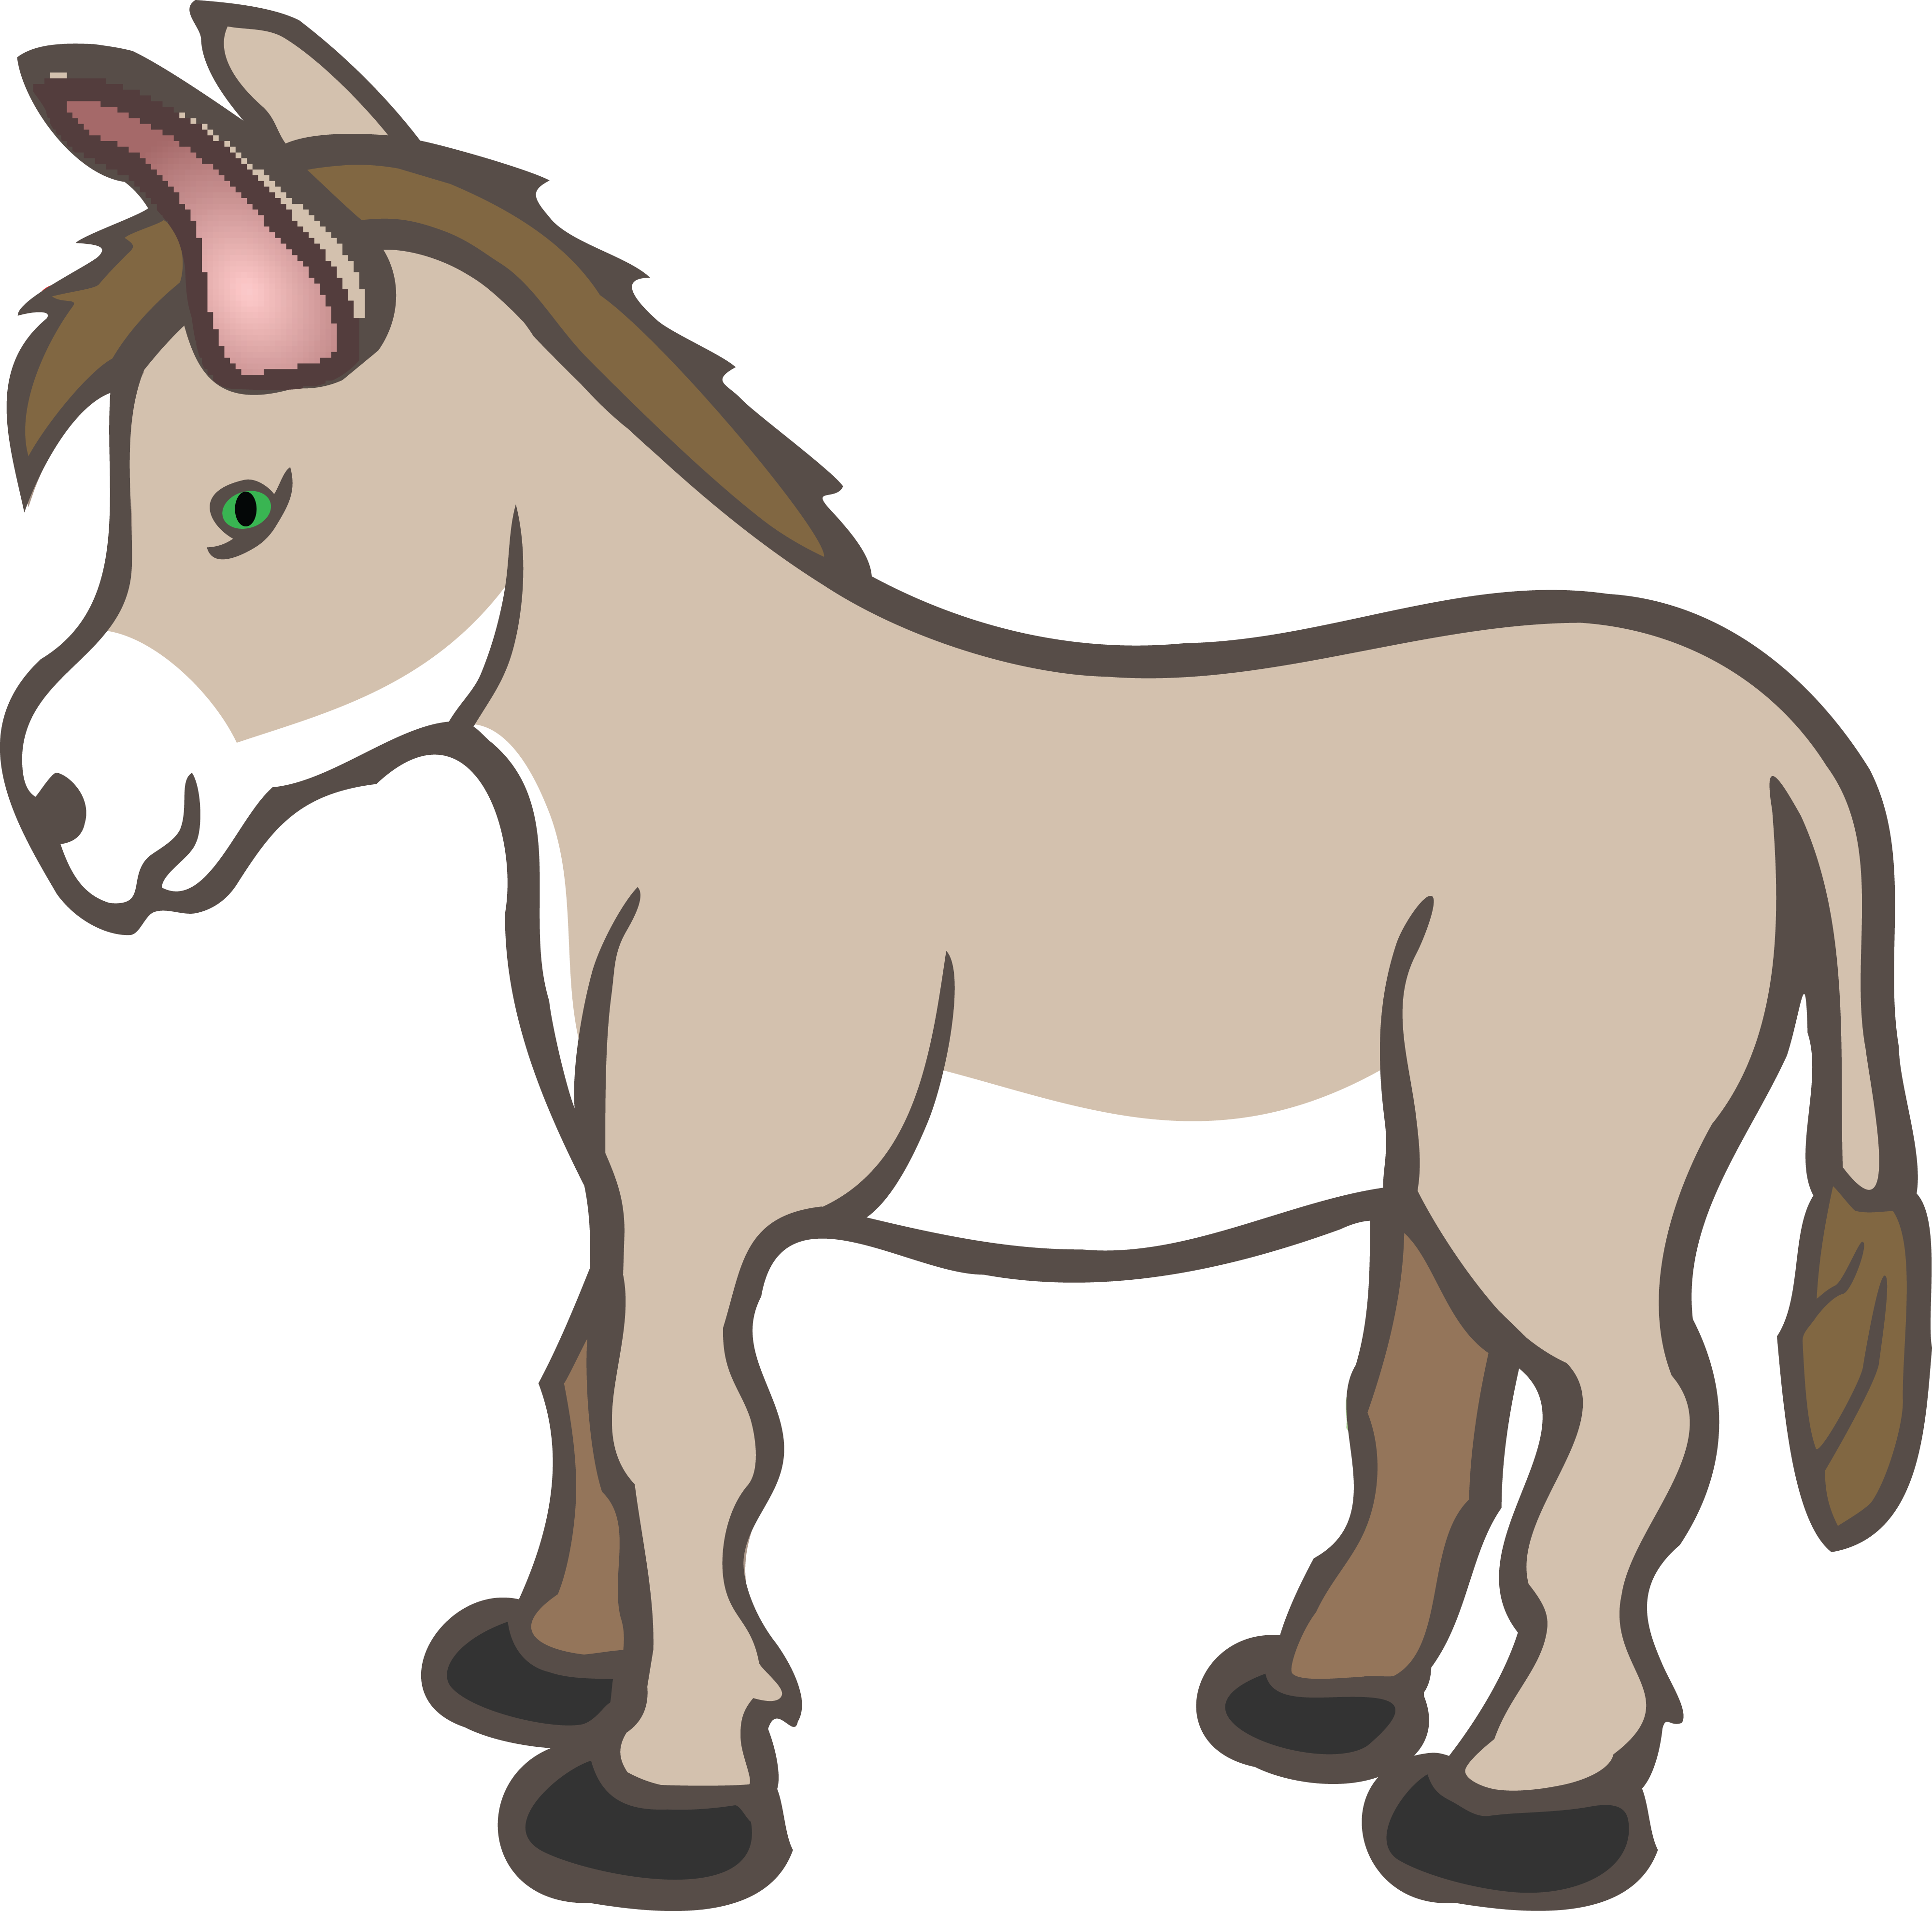 Clipart Of A Donkey.